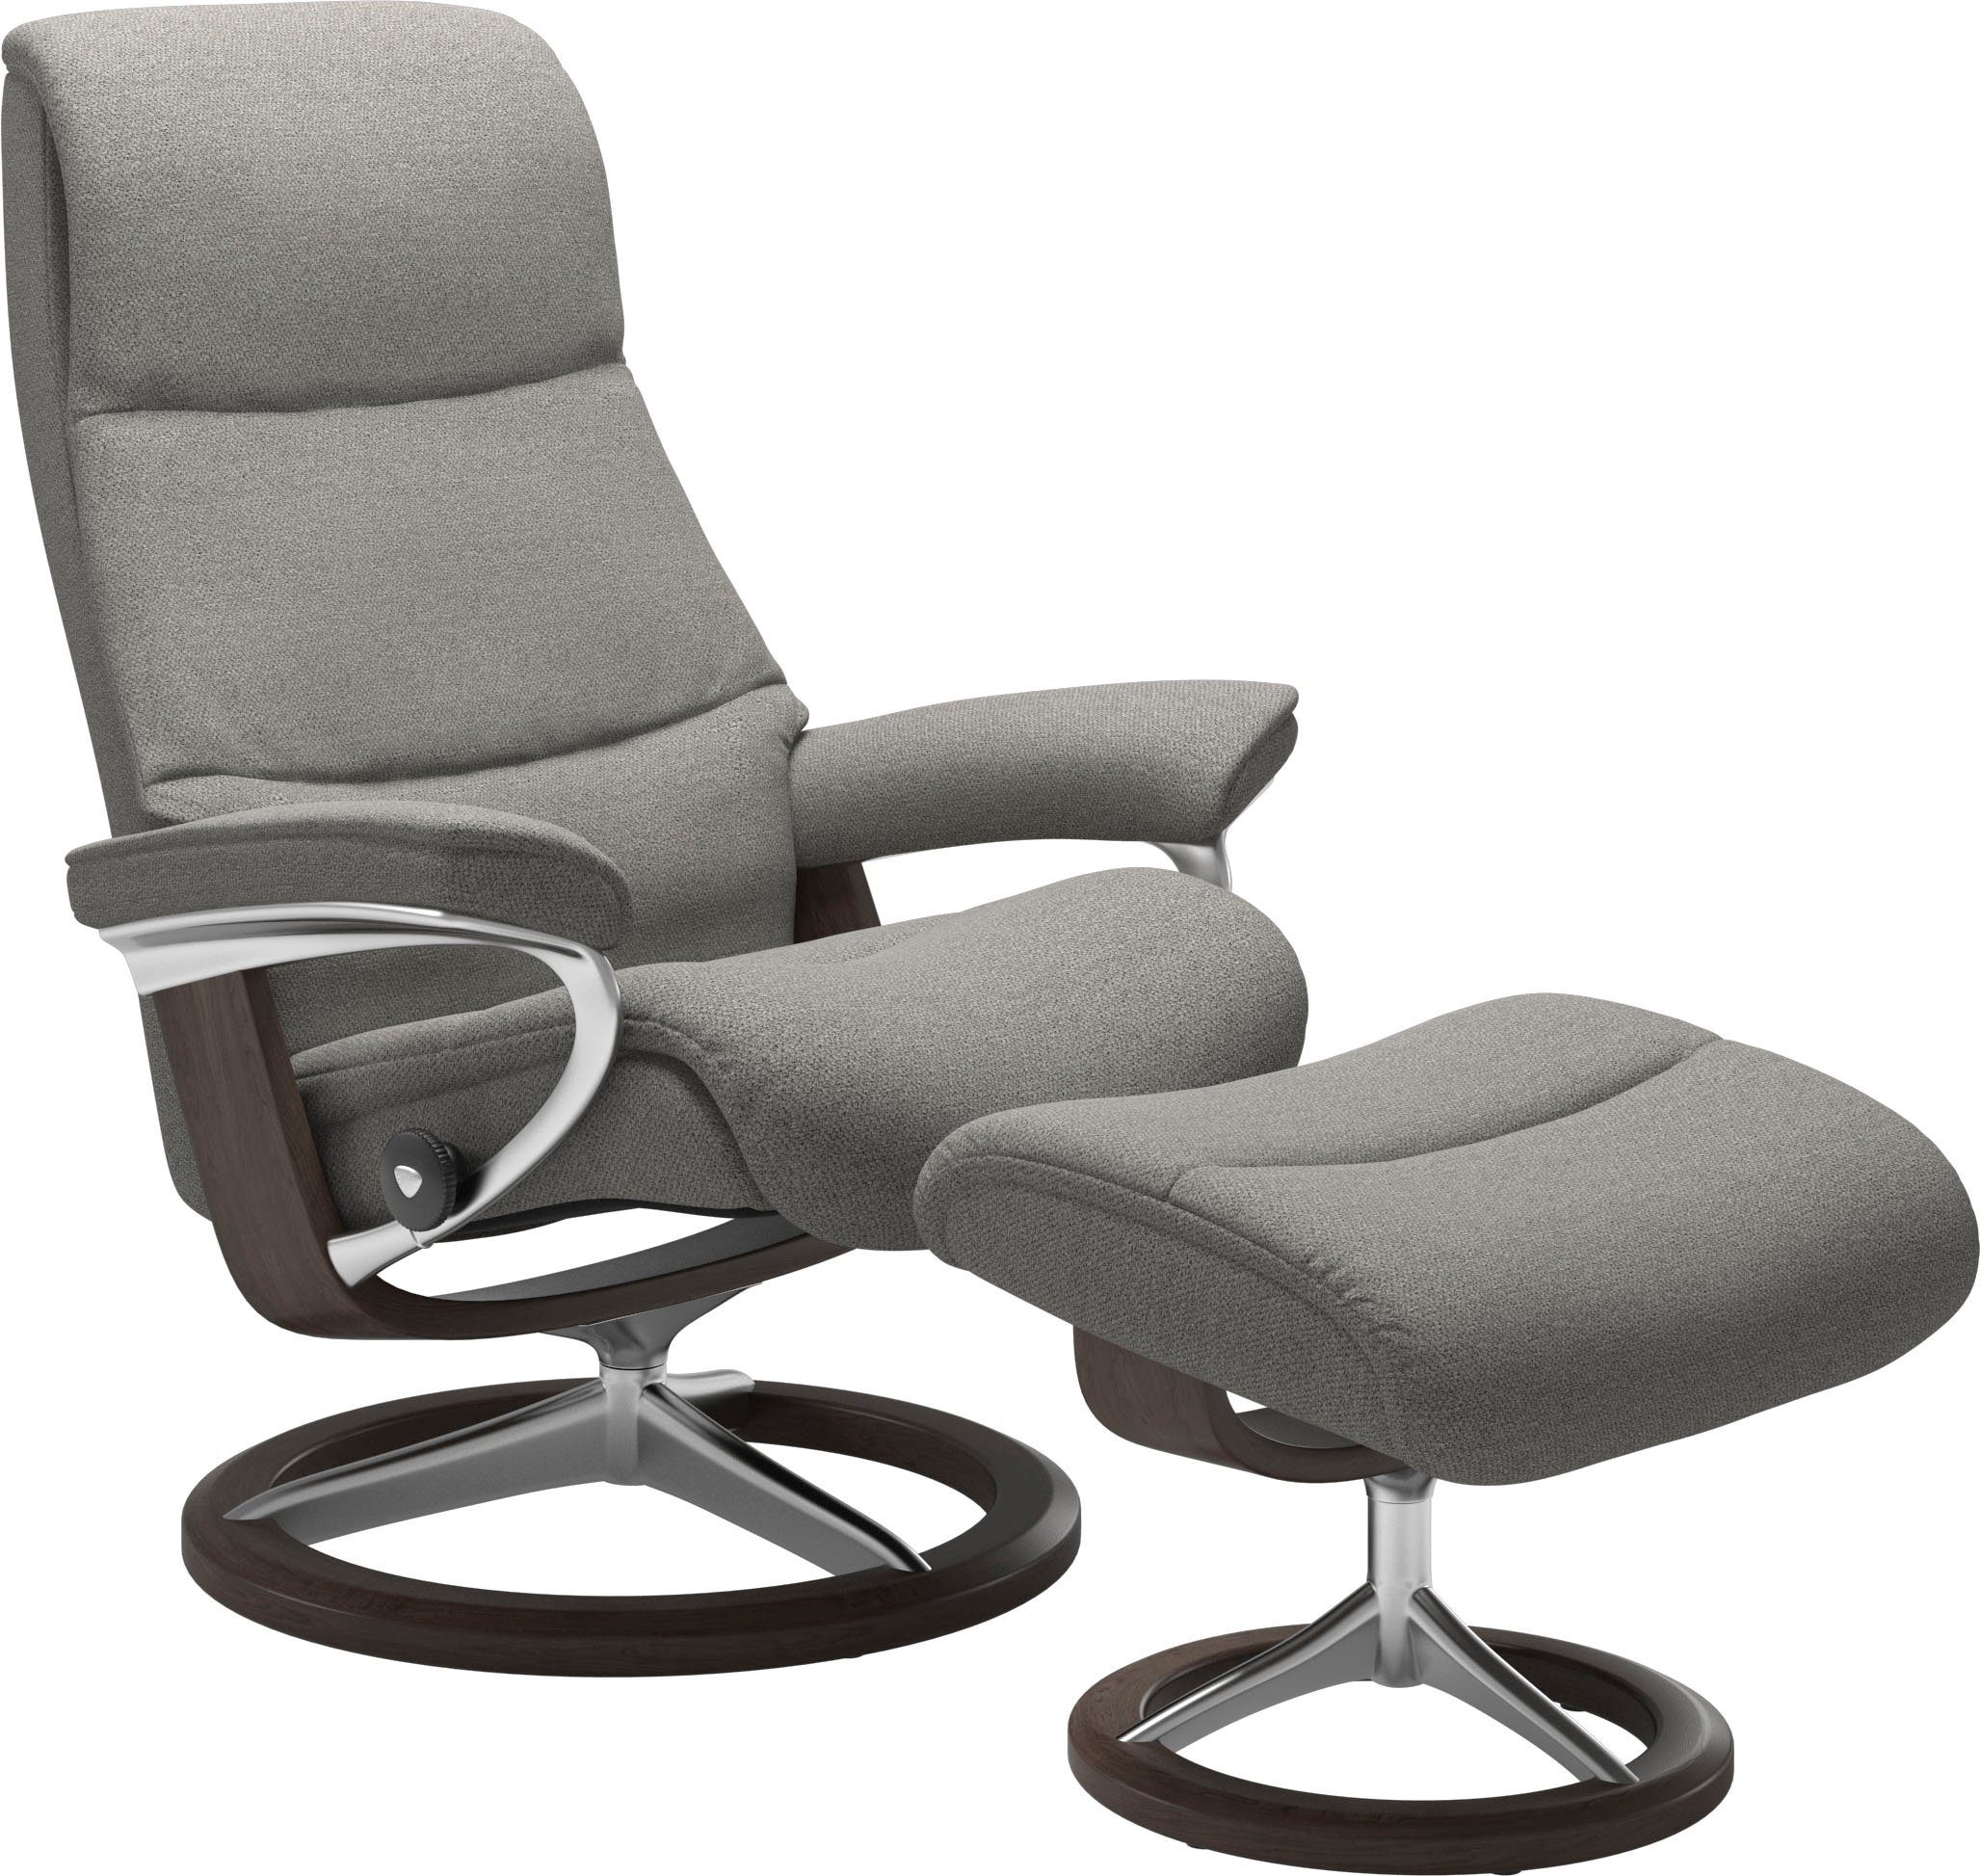 View, Wenge S,Gestell mit Signature Größe Relaxsessel Base, Stressless®